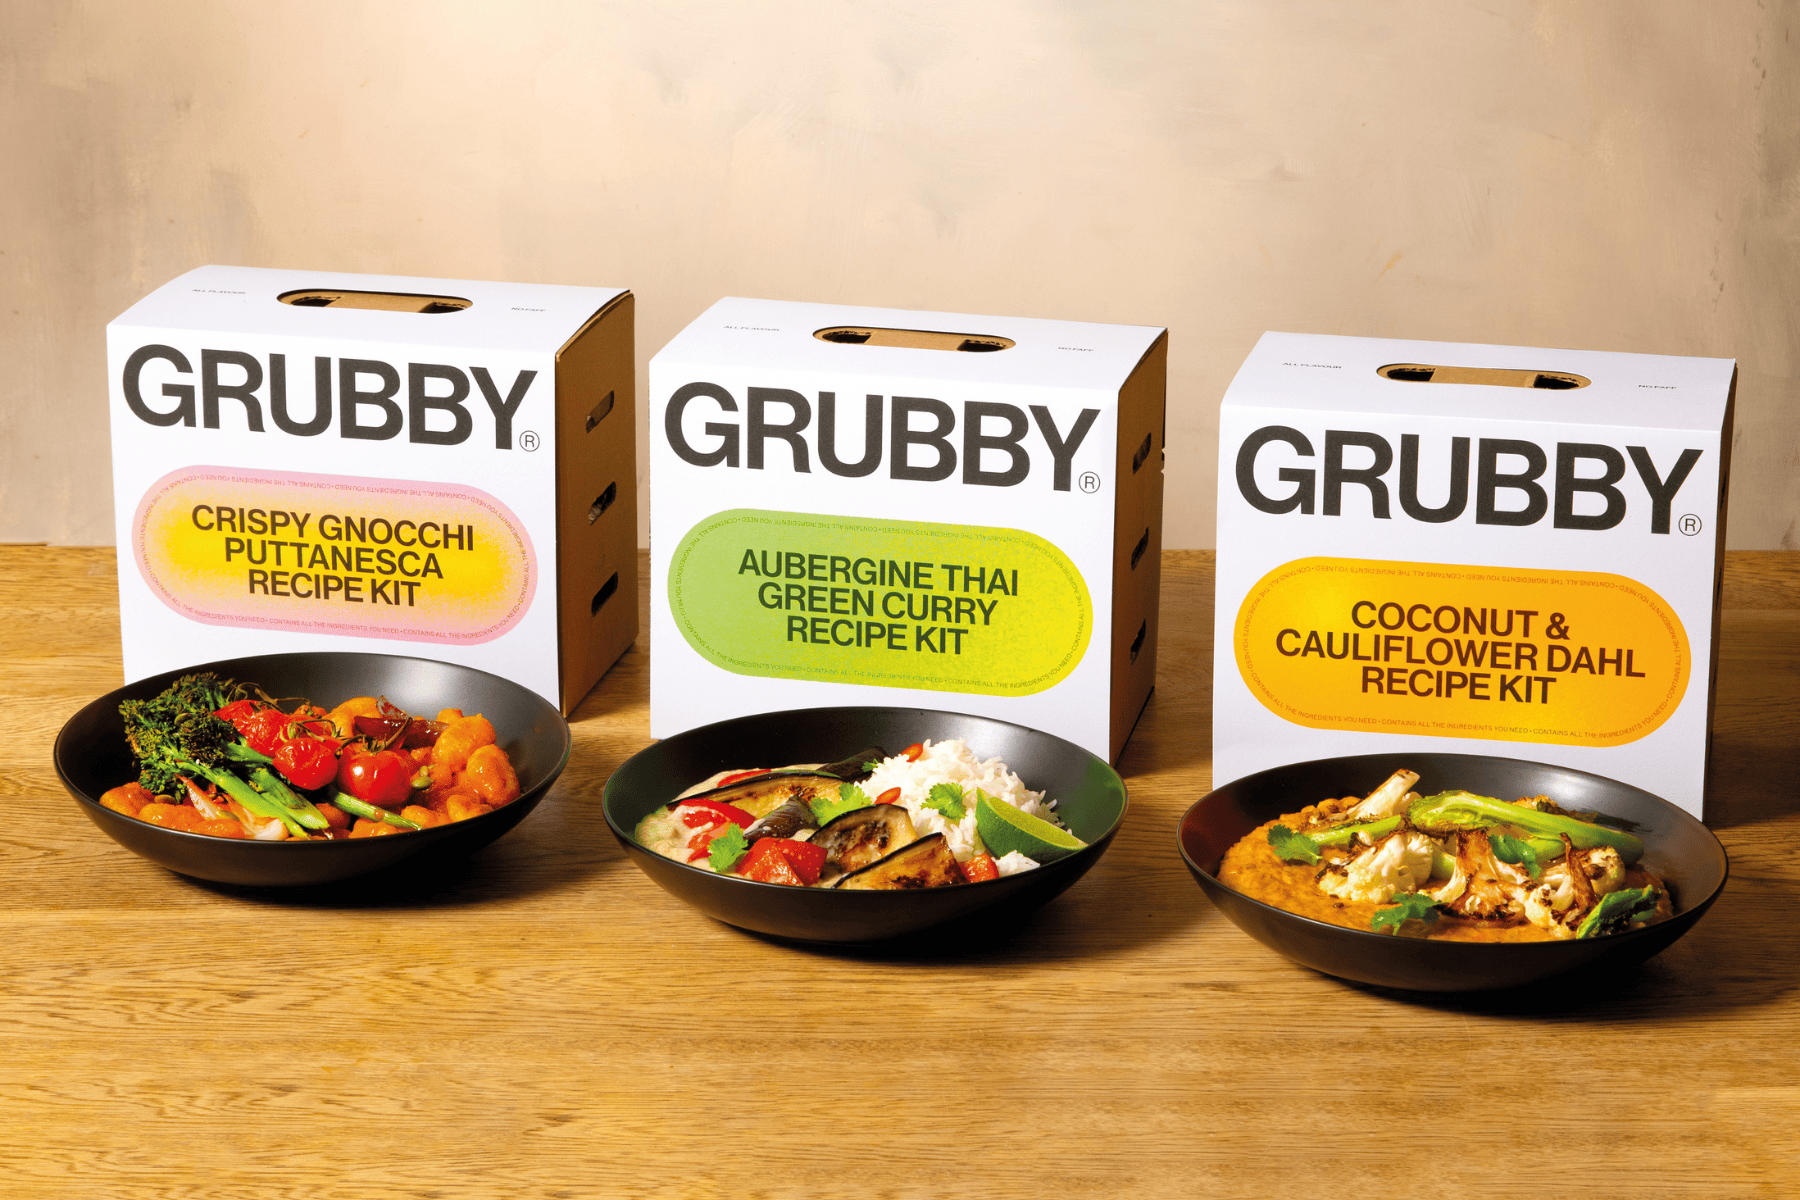 Grubby Plant-Based Meal Kits